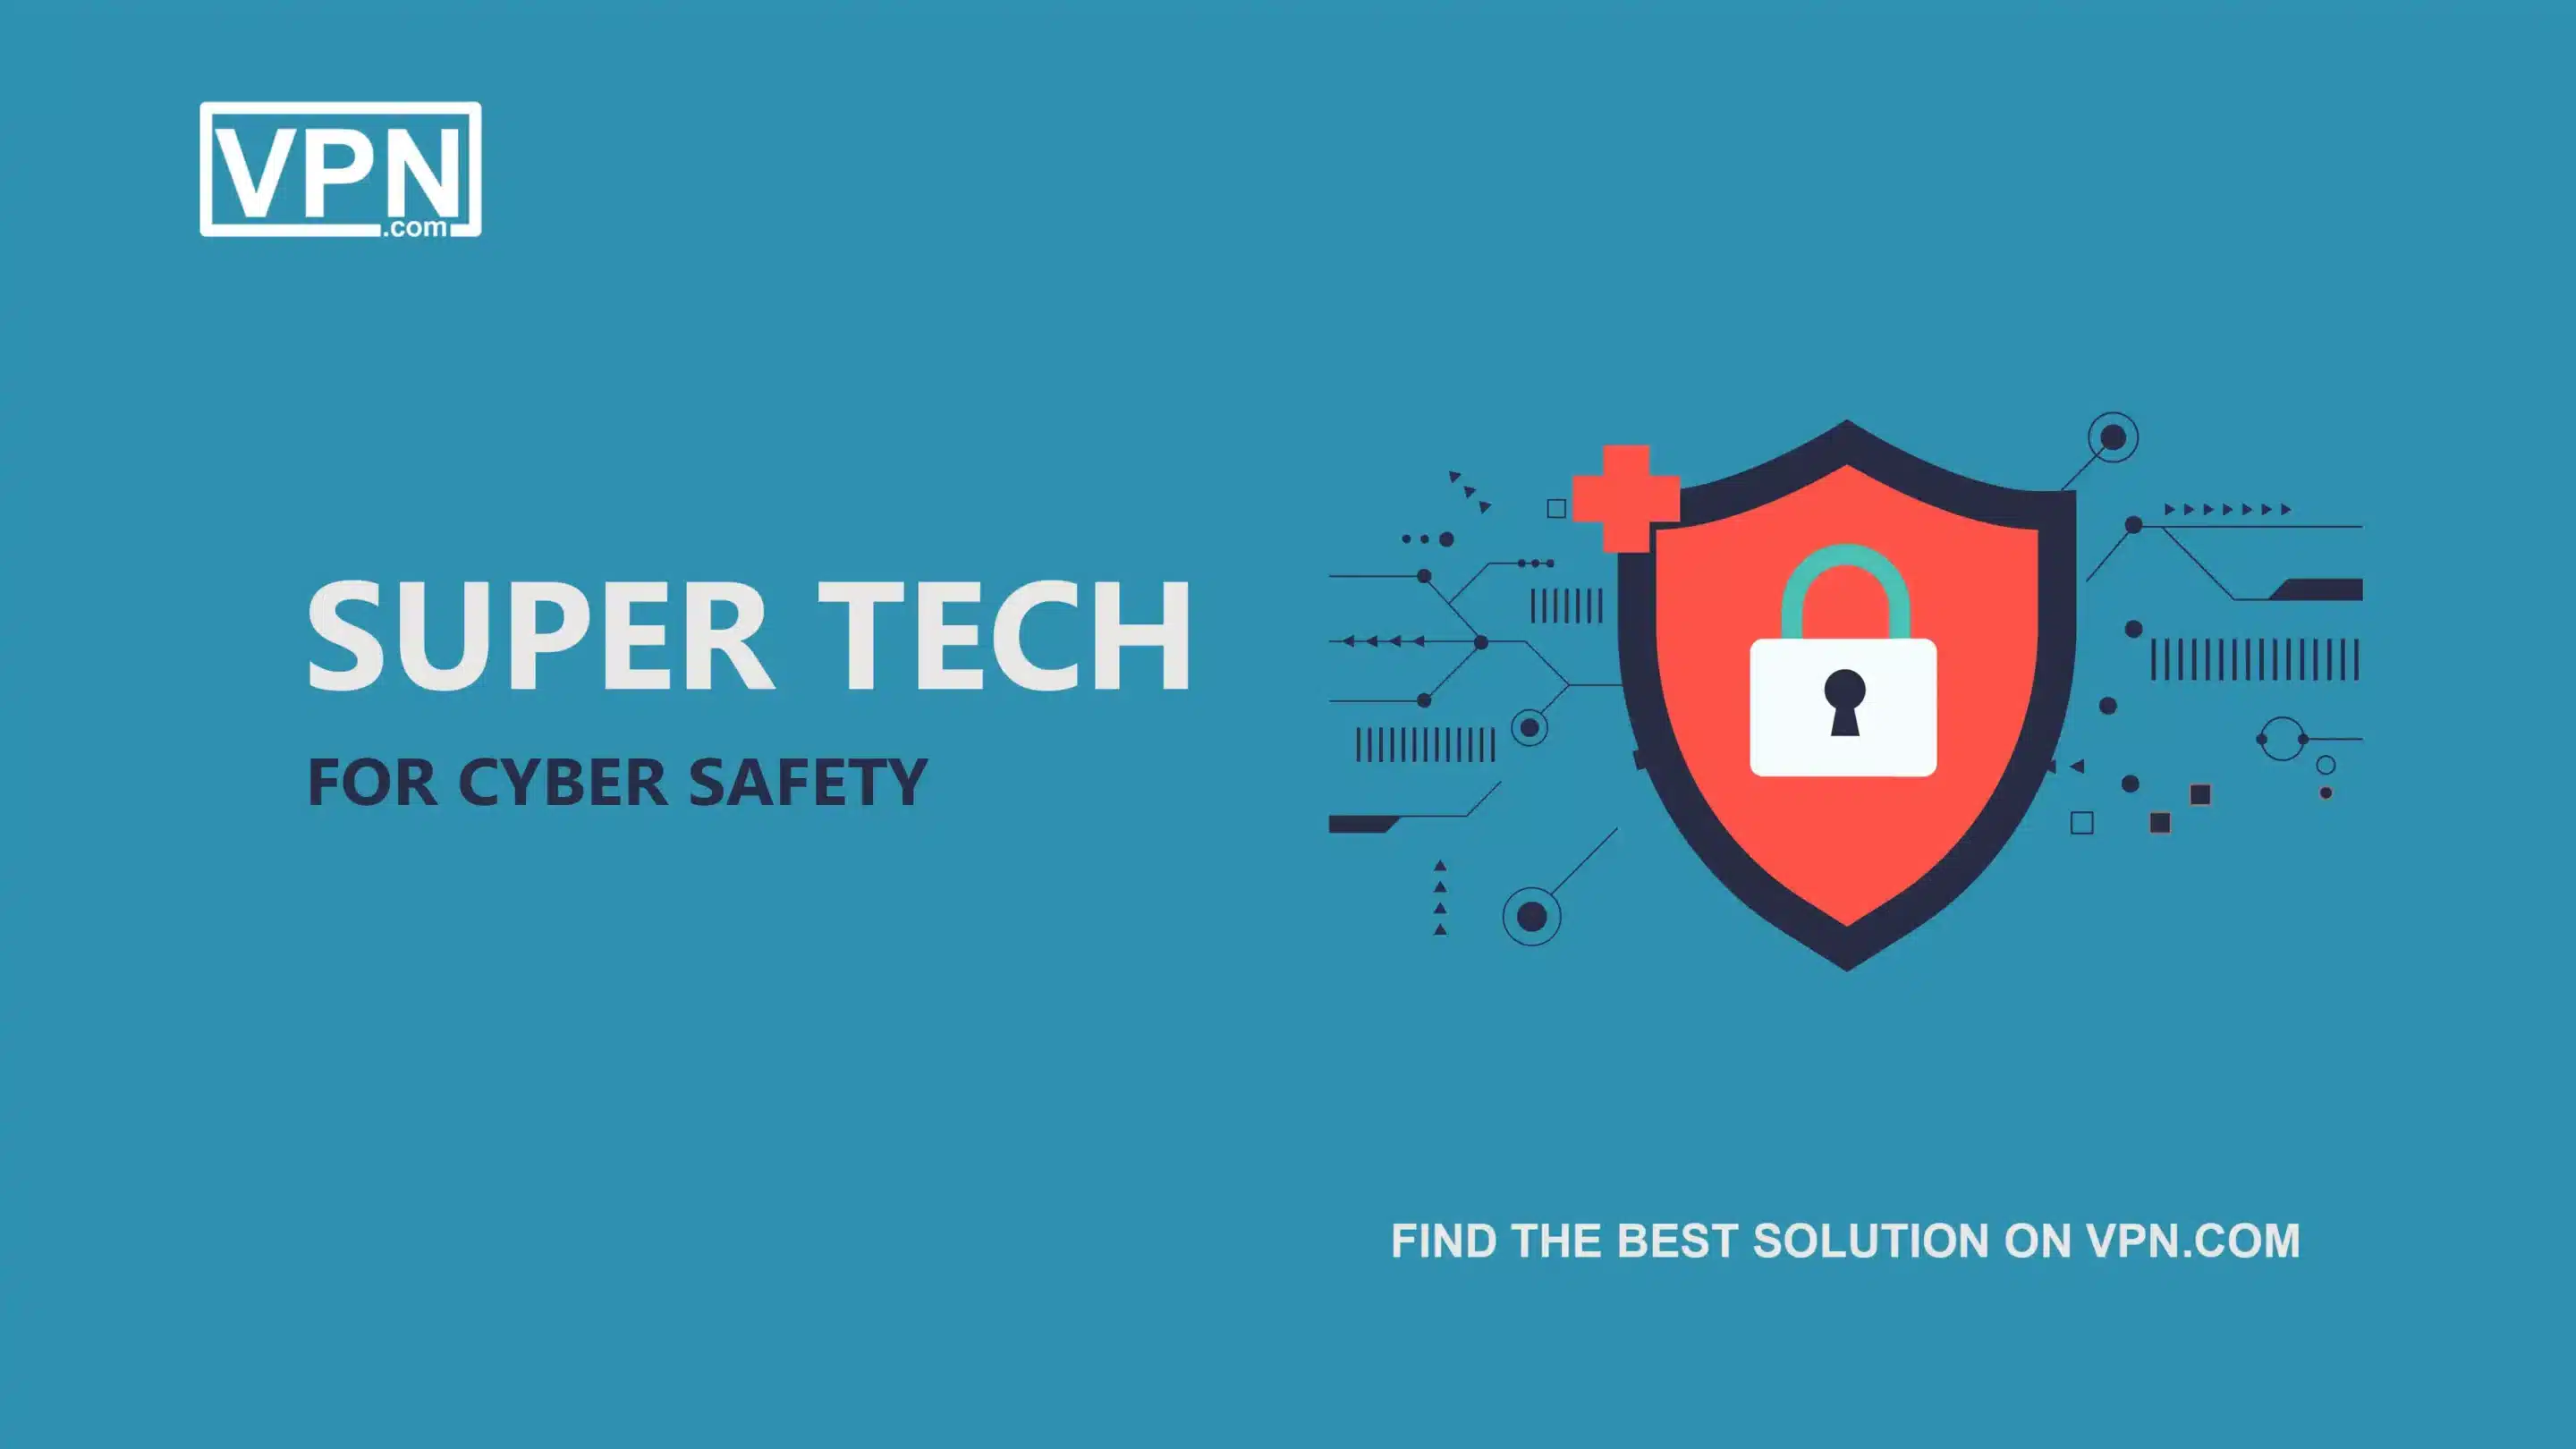 Super Tech for Cyber Safety